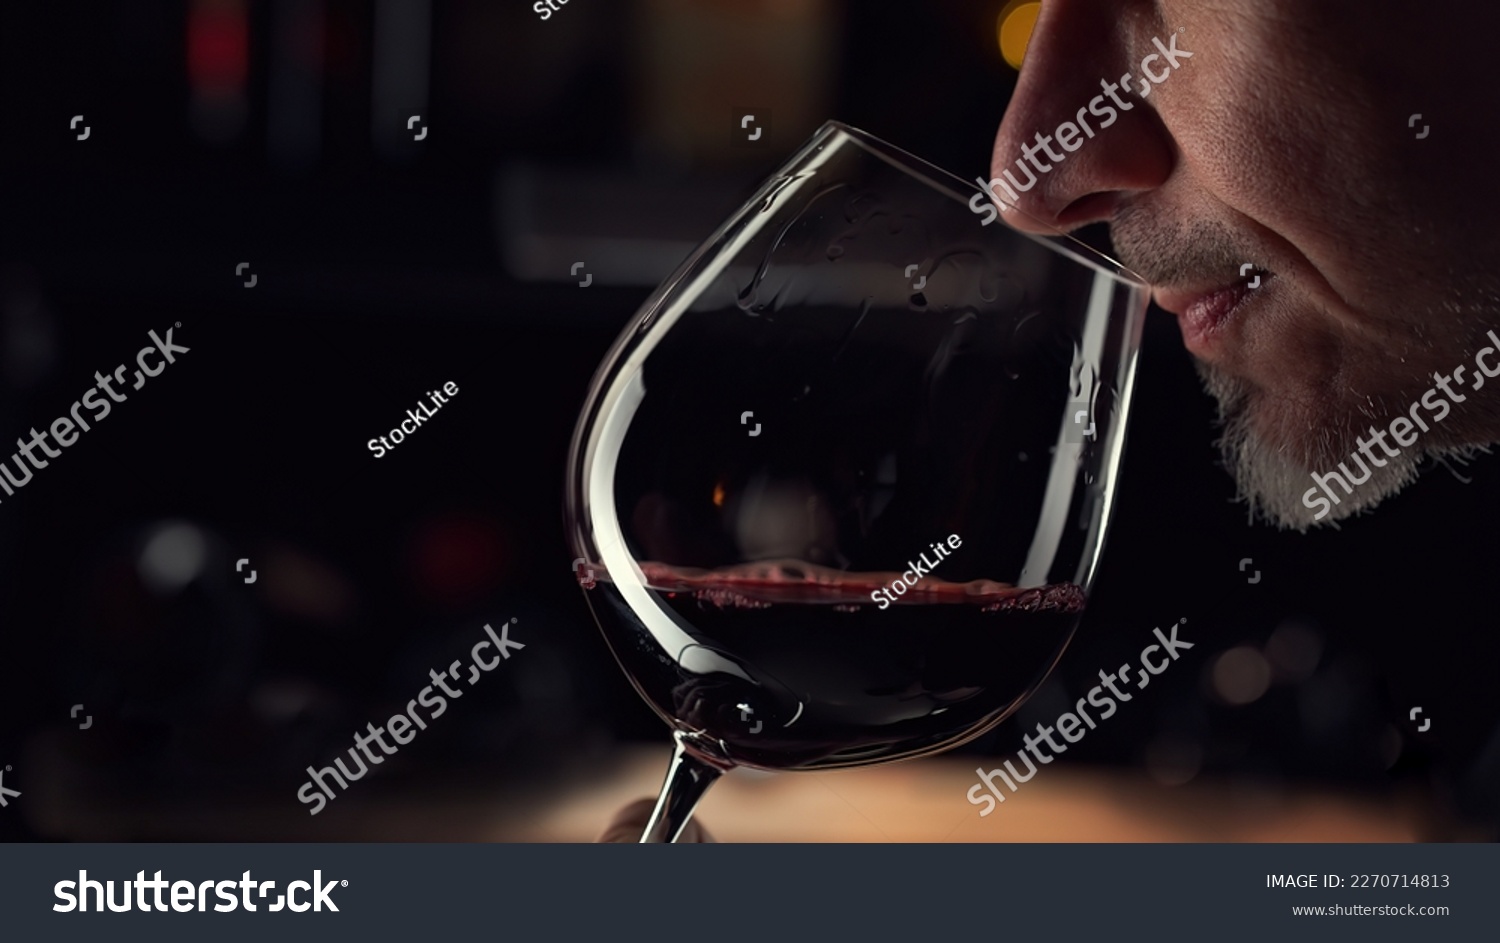 Close up man smelling red wine in wine glass. Wine expert tasting, rating and drinking wine, bottles in background. #2270714813